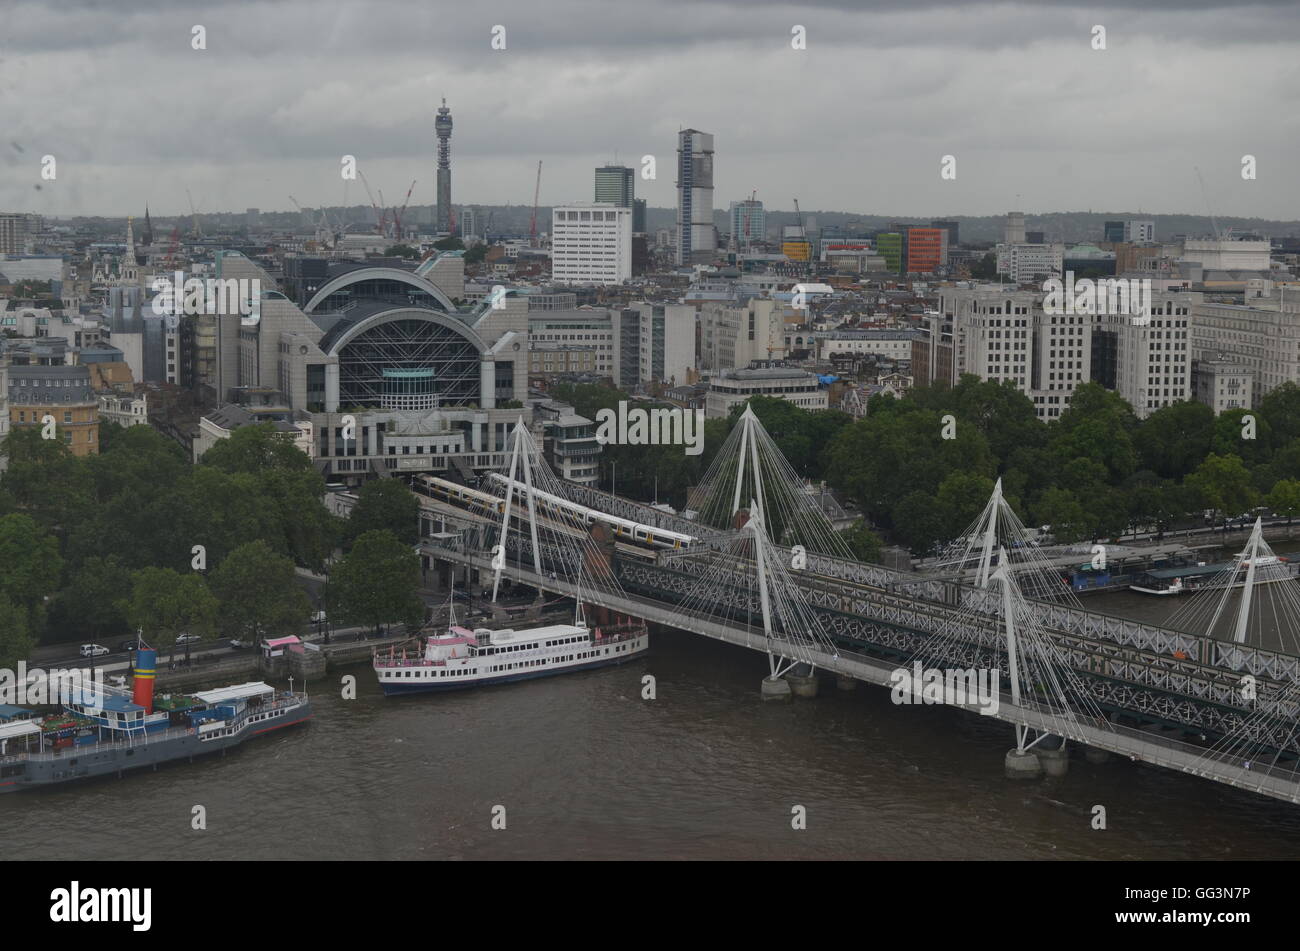 Views of Charing Cross, Westminster and the River Thames from the London Eye. London, United Kingdom. Stock Photo